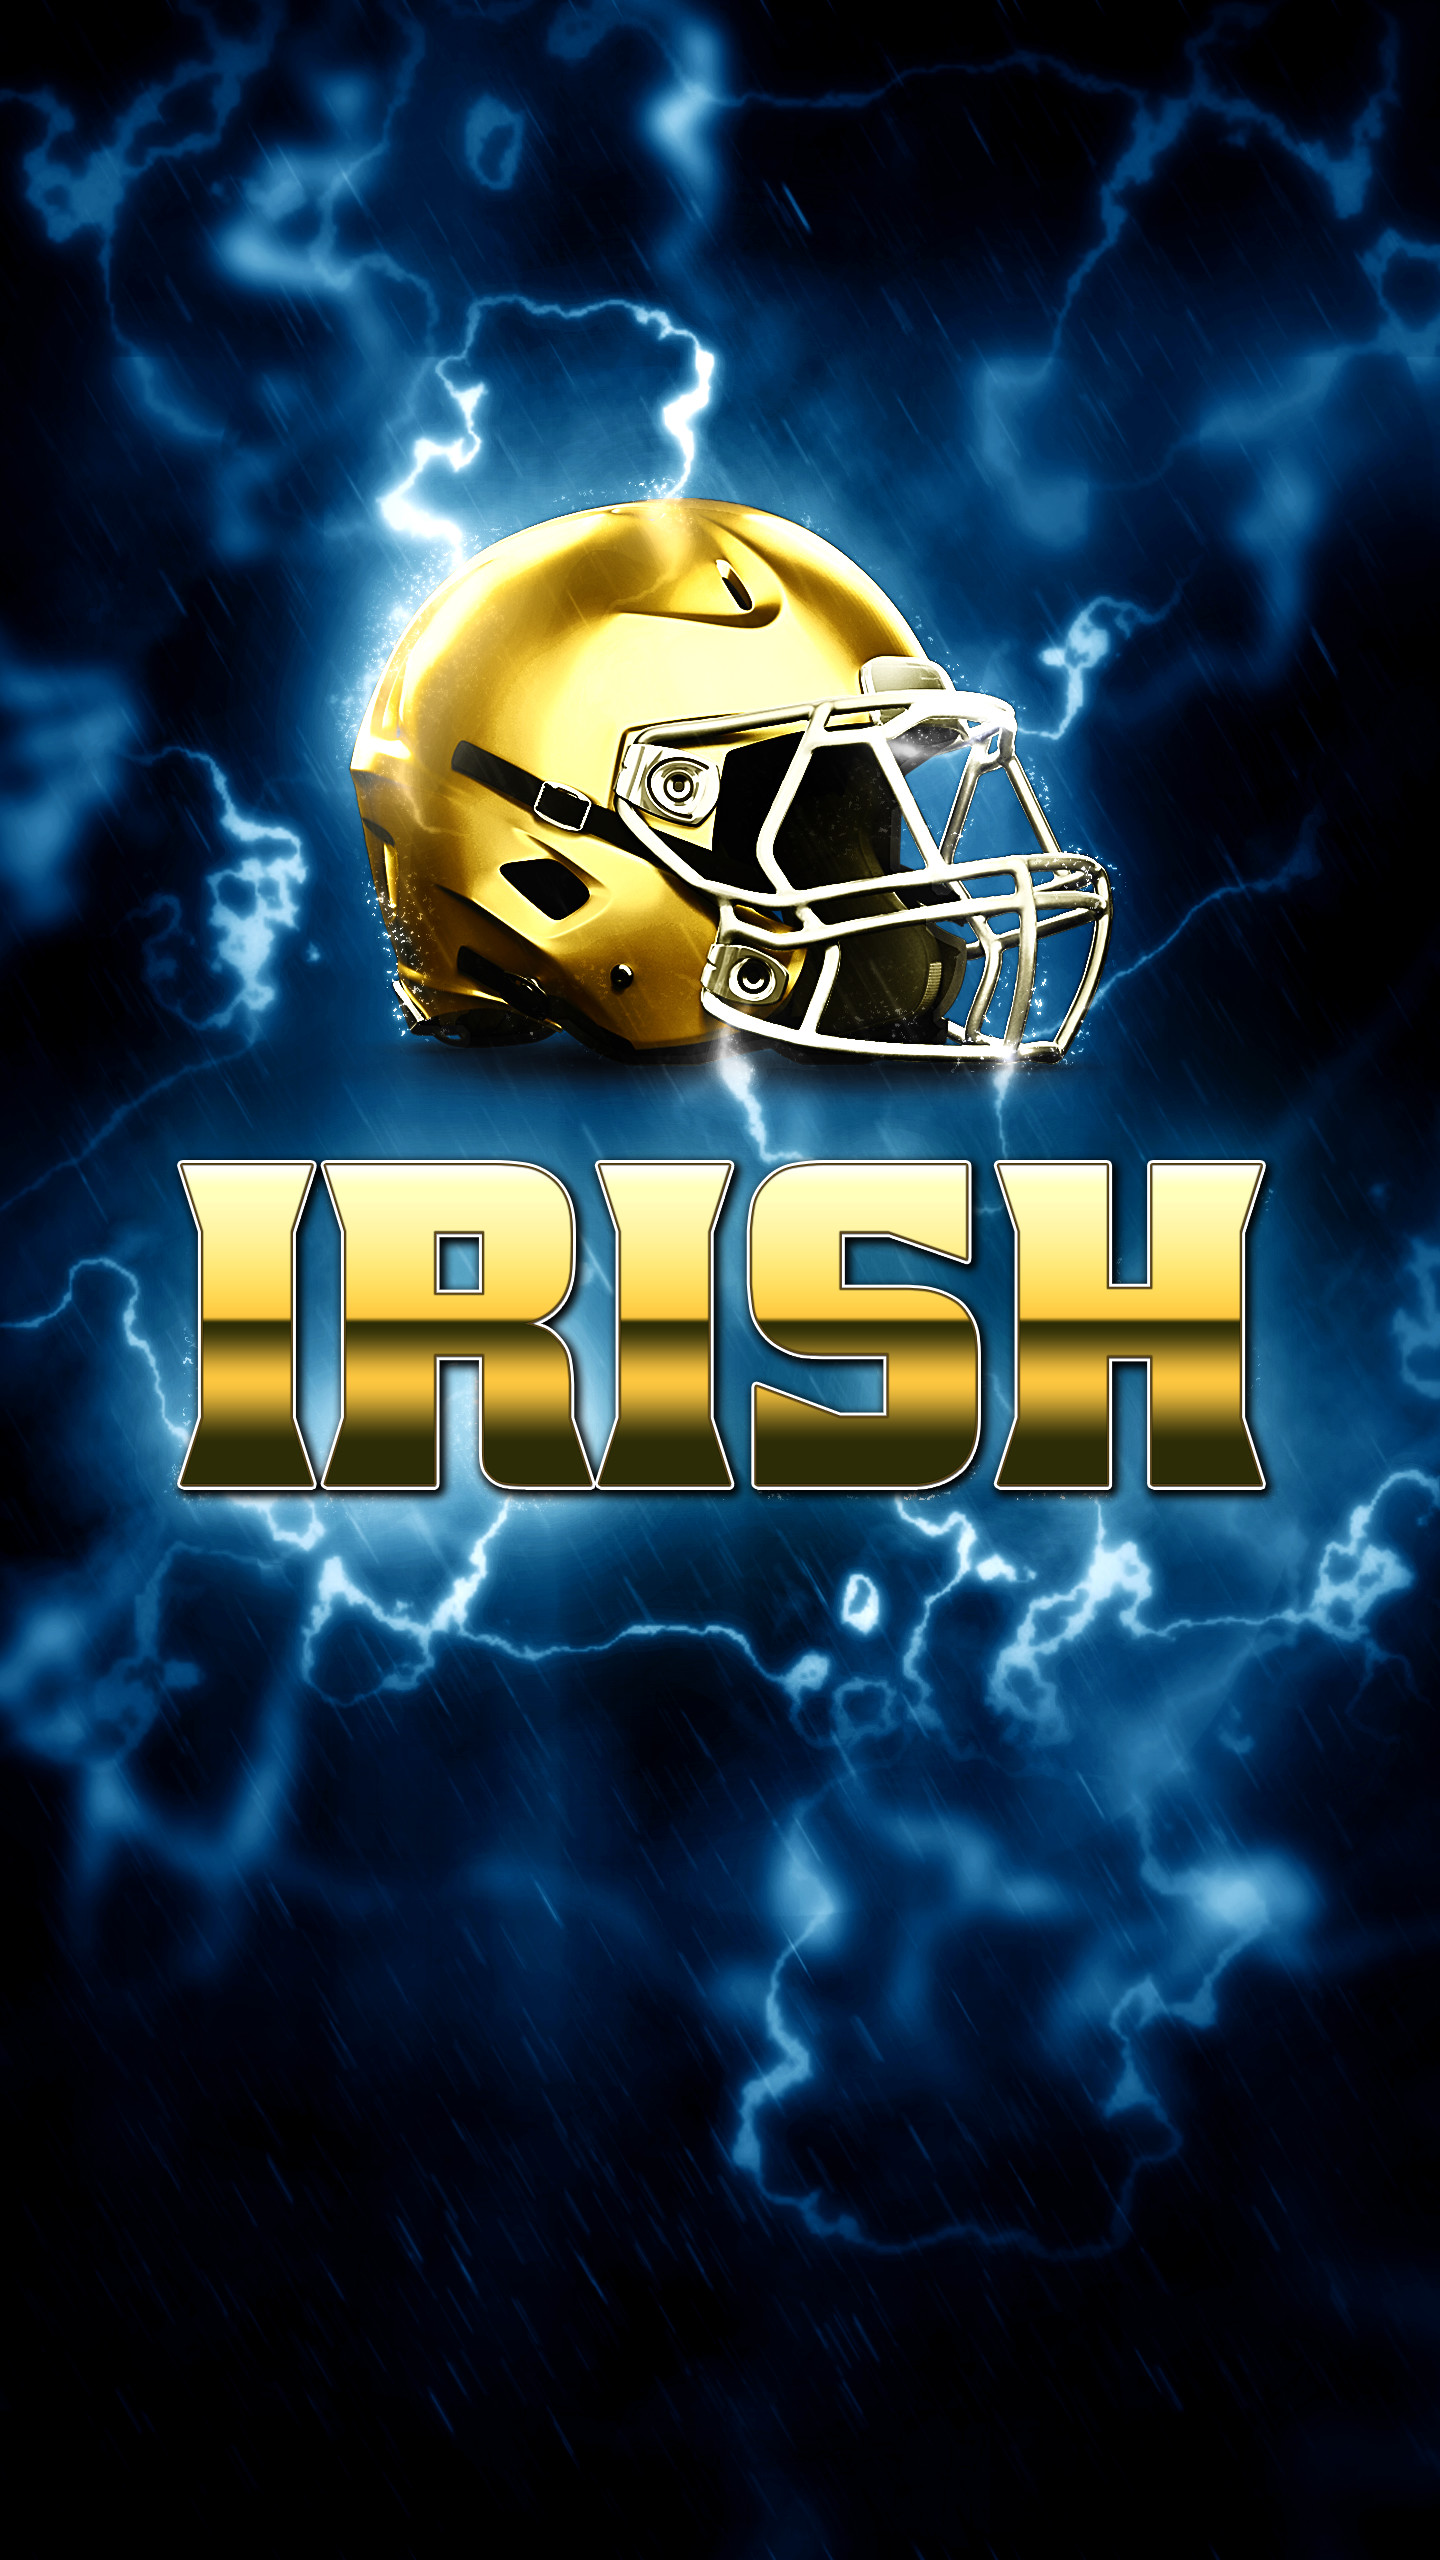 1440x2560 Notre Dame iPhone/Android Wallpaper for your Smart Phone. Save and Download  Image from. Notre Dame WallpaperMetal MulishaScreen ...